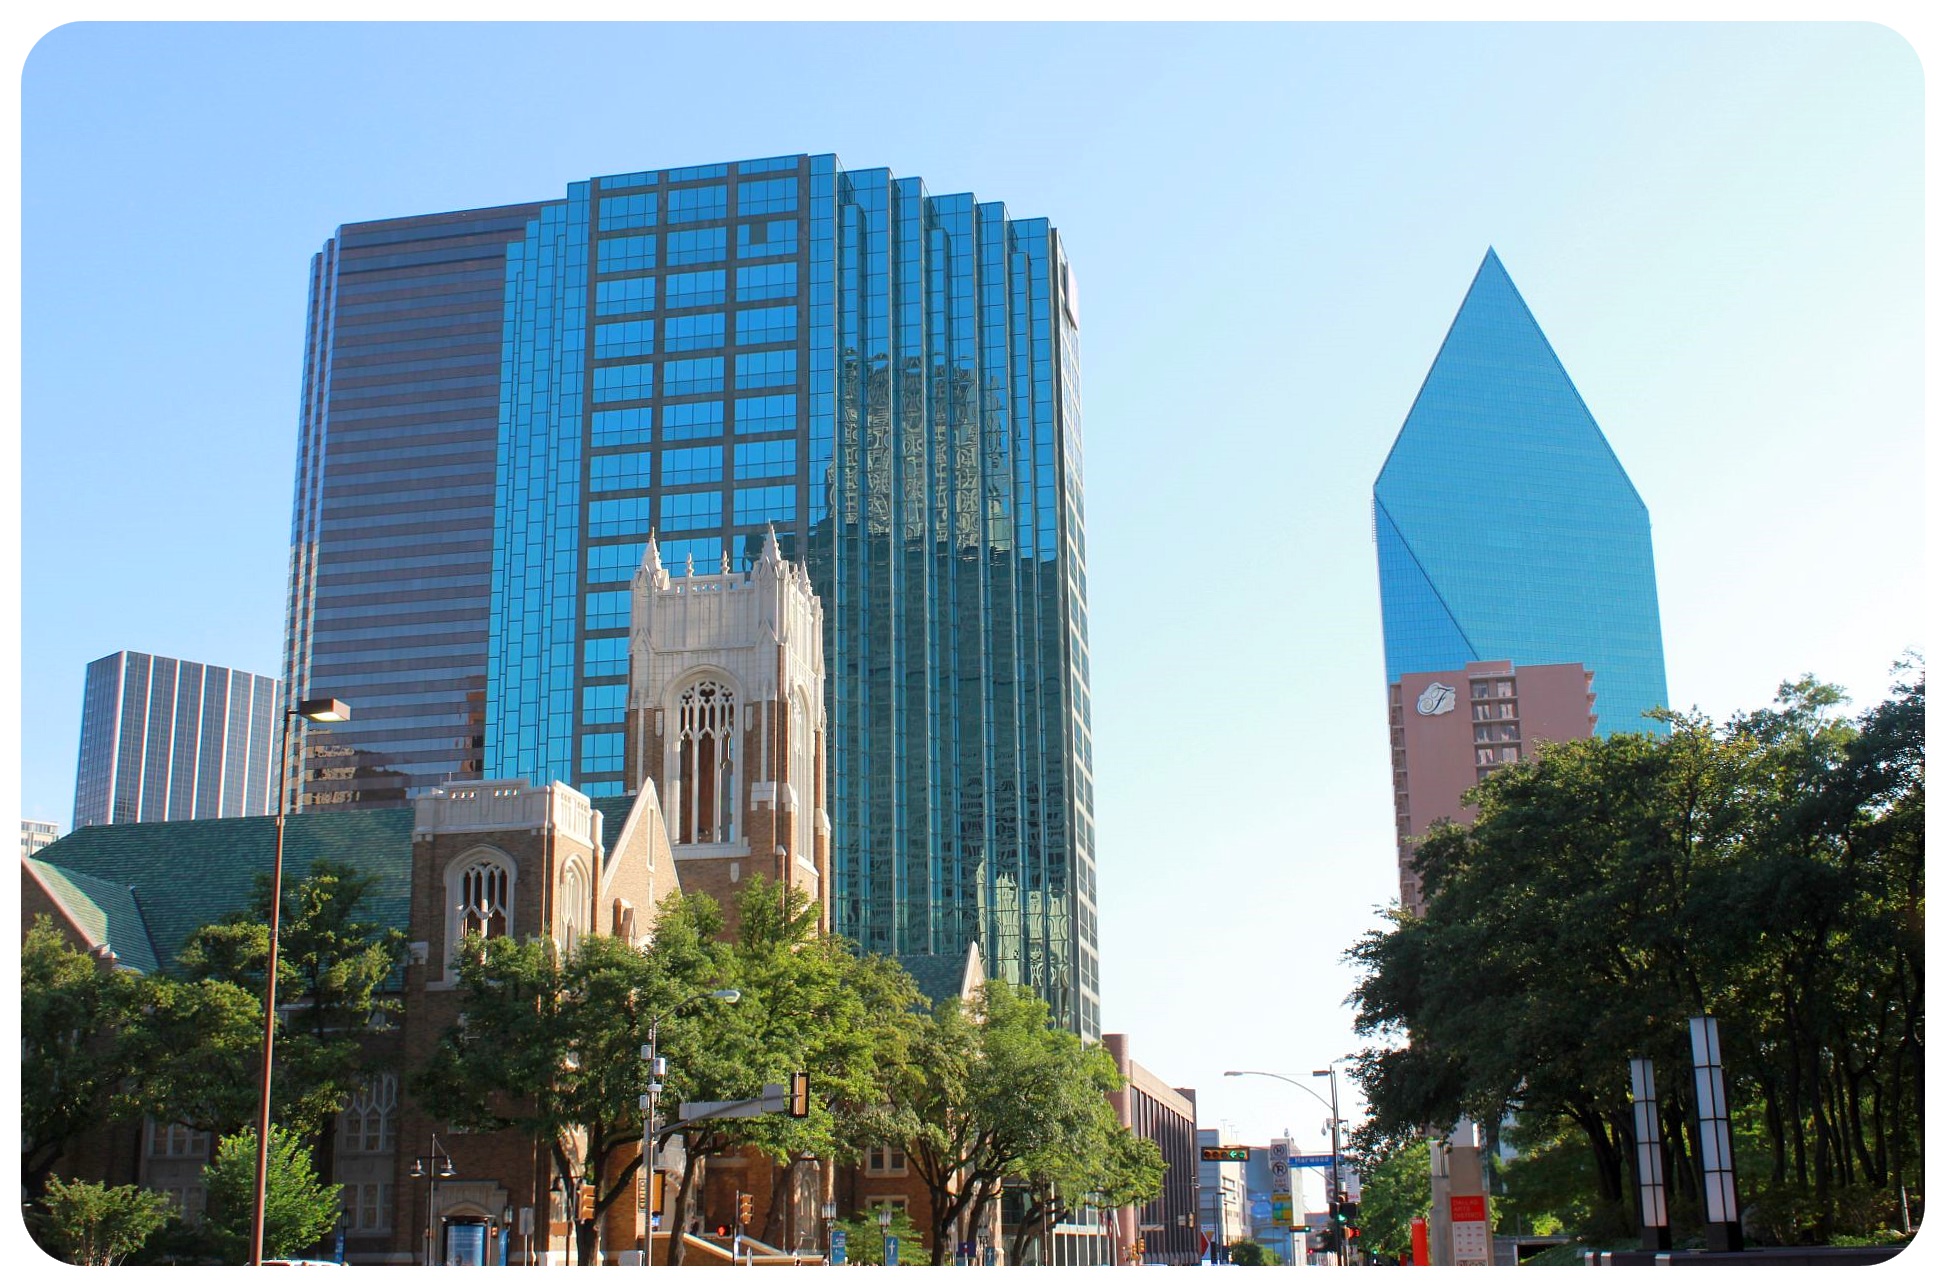 Places You Need to Visit on Your Dallas Trip